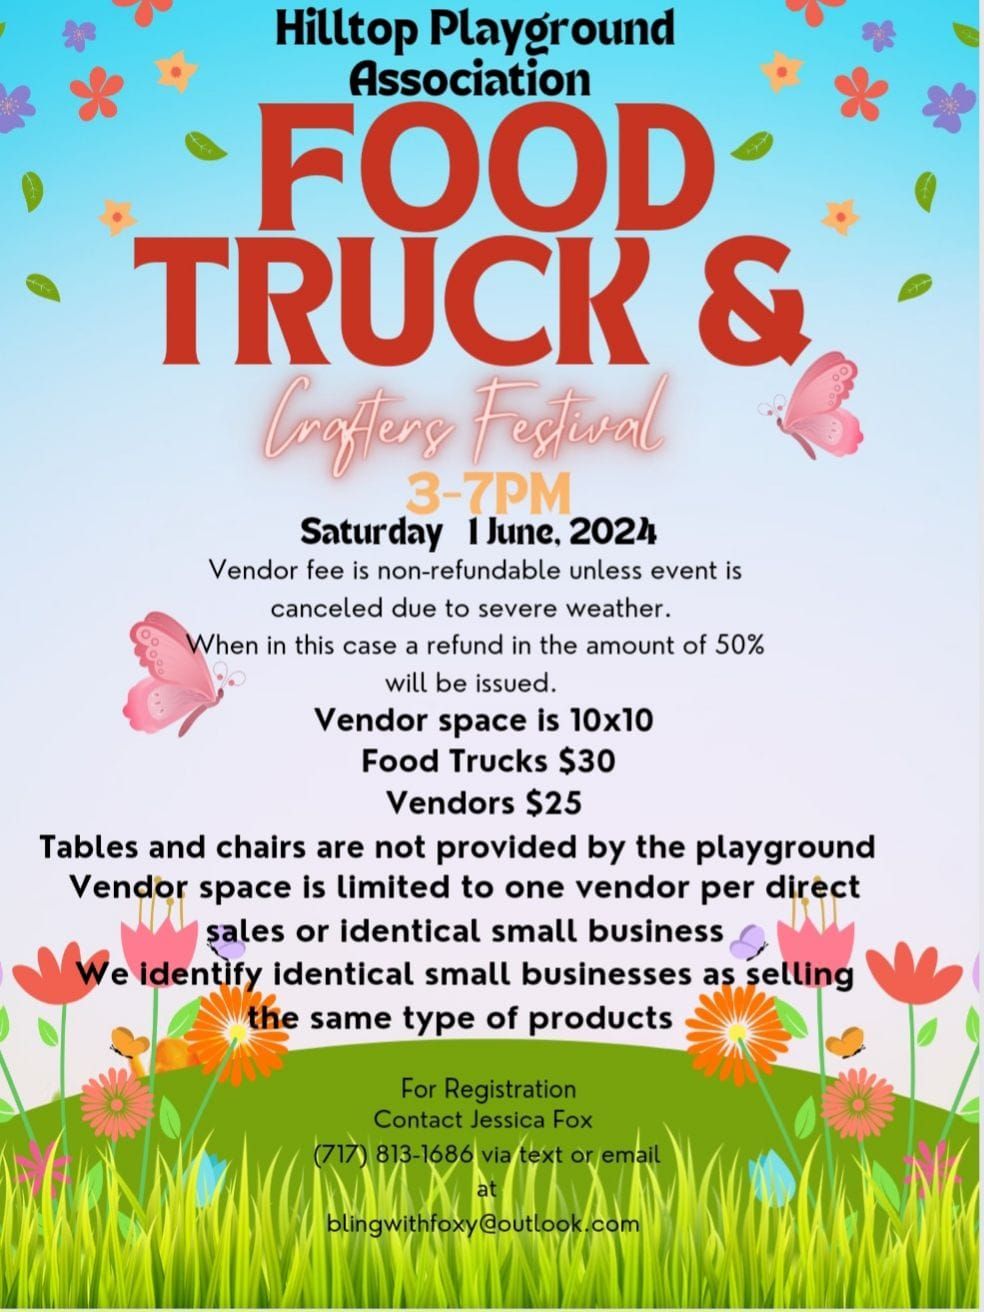 Food Truck & Crafters Festival 